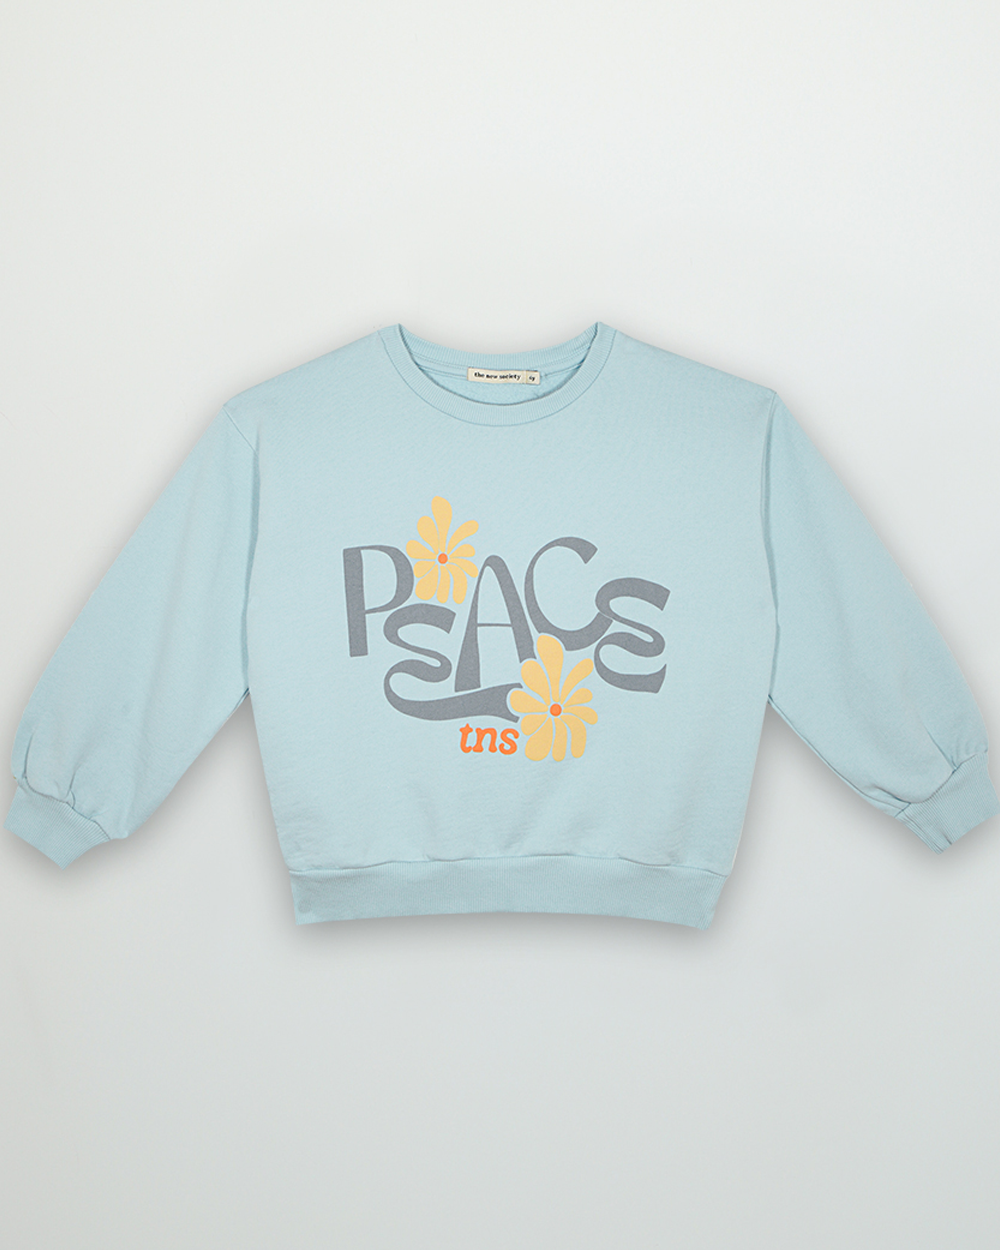 [THE NEW SOCIETY] Lapace Sweater [6Y, 12Y]